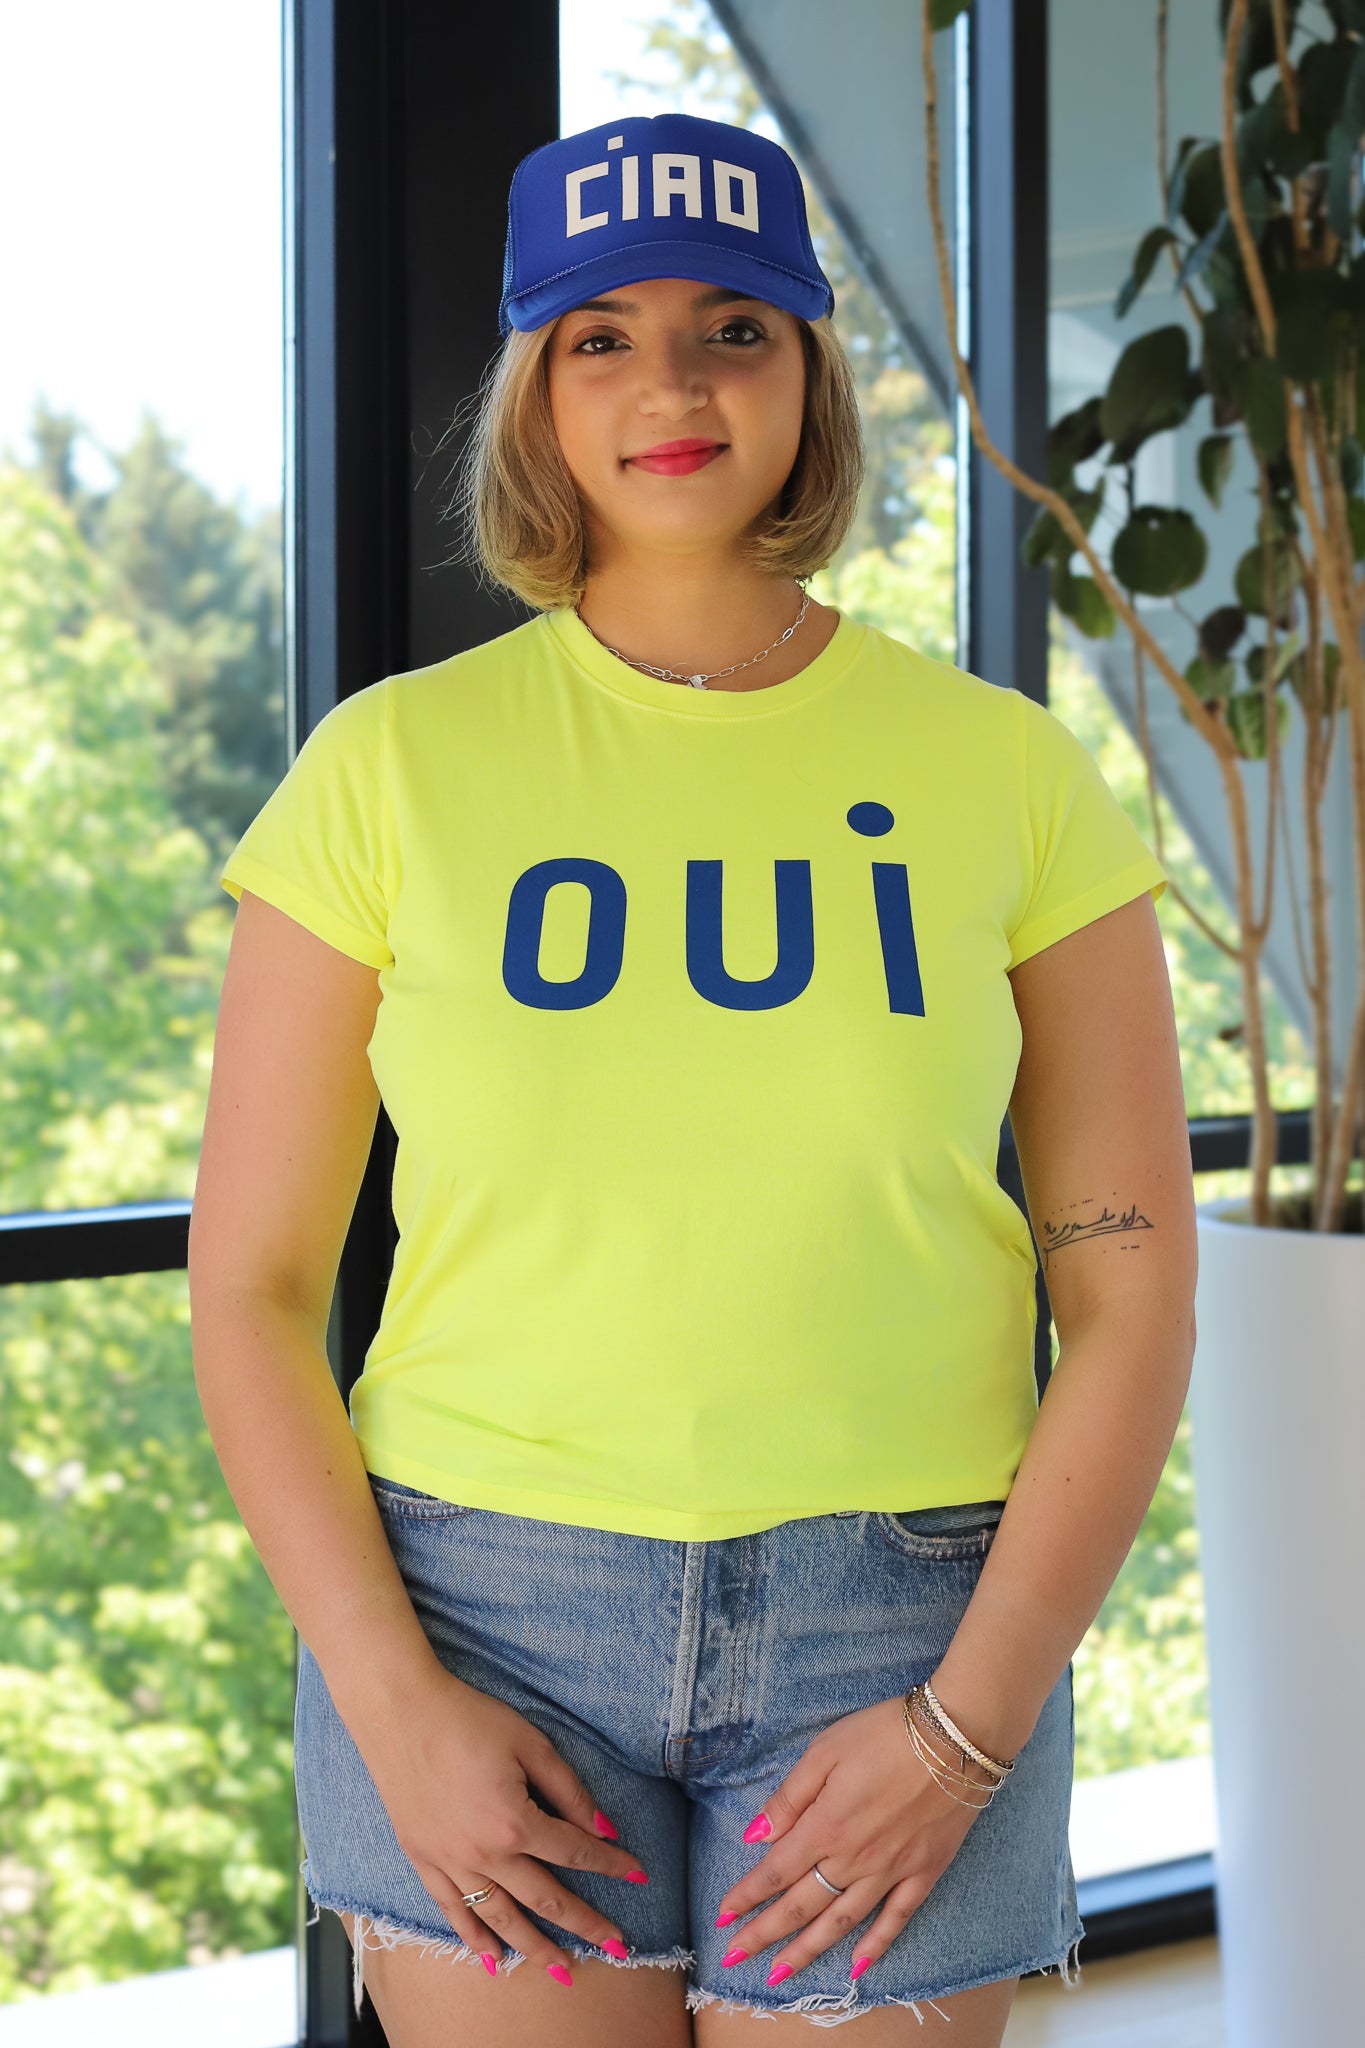 Clare V. Oui Classic Tee Yellow Cobalt